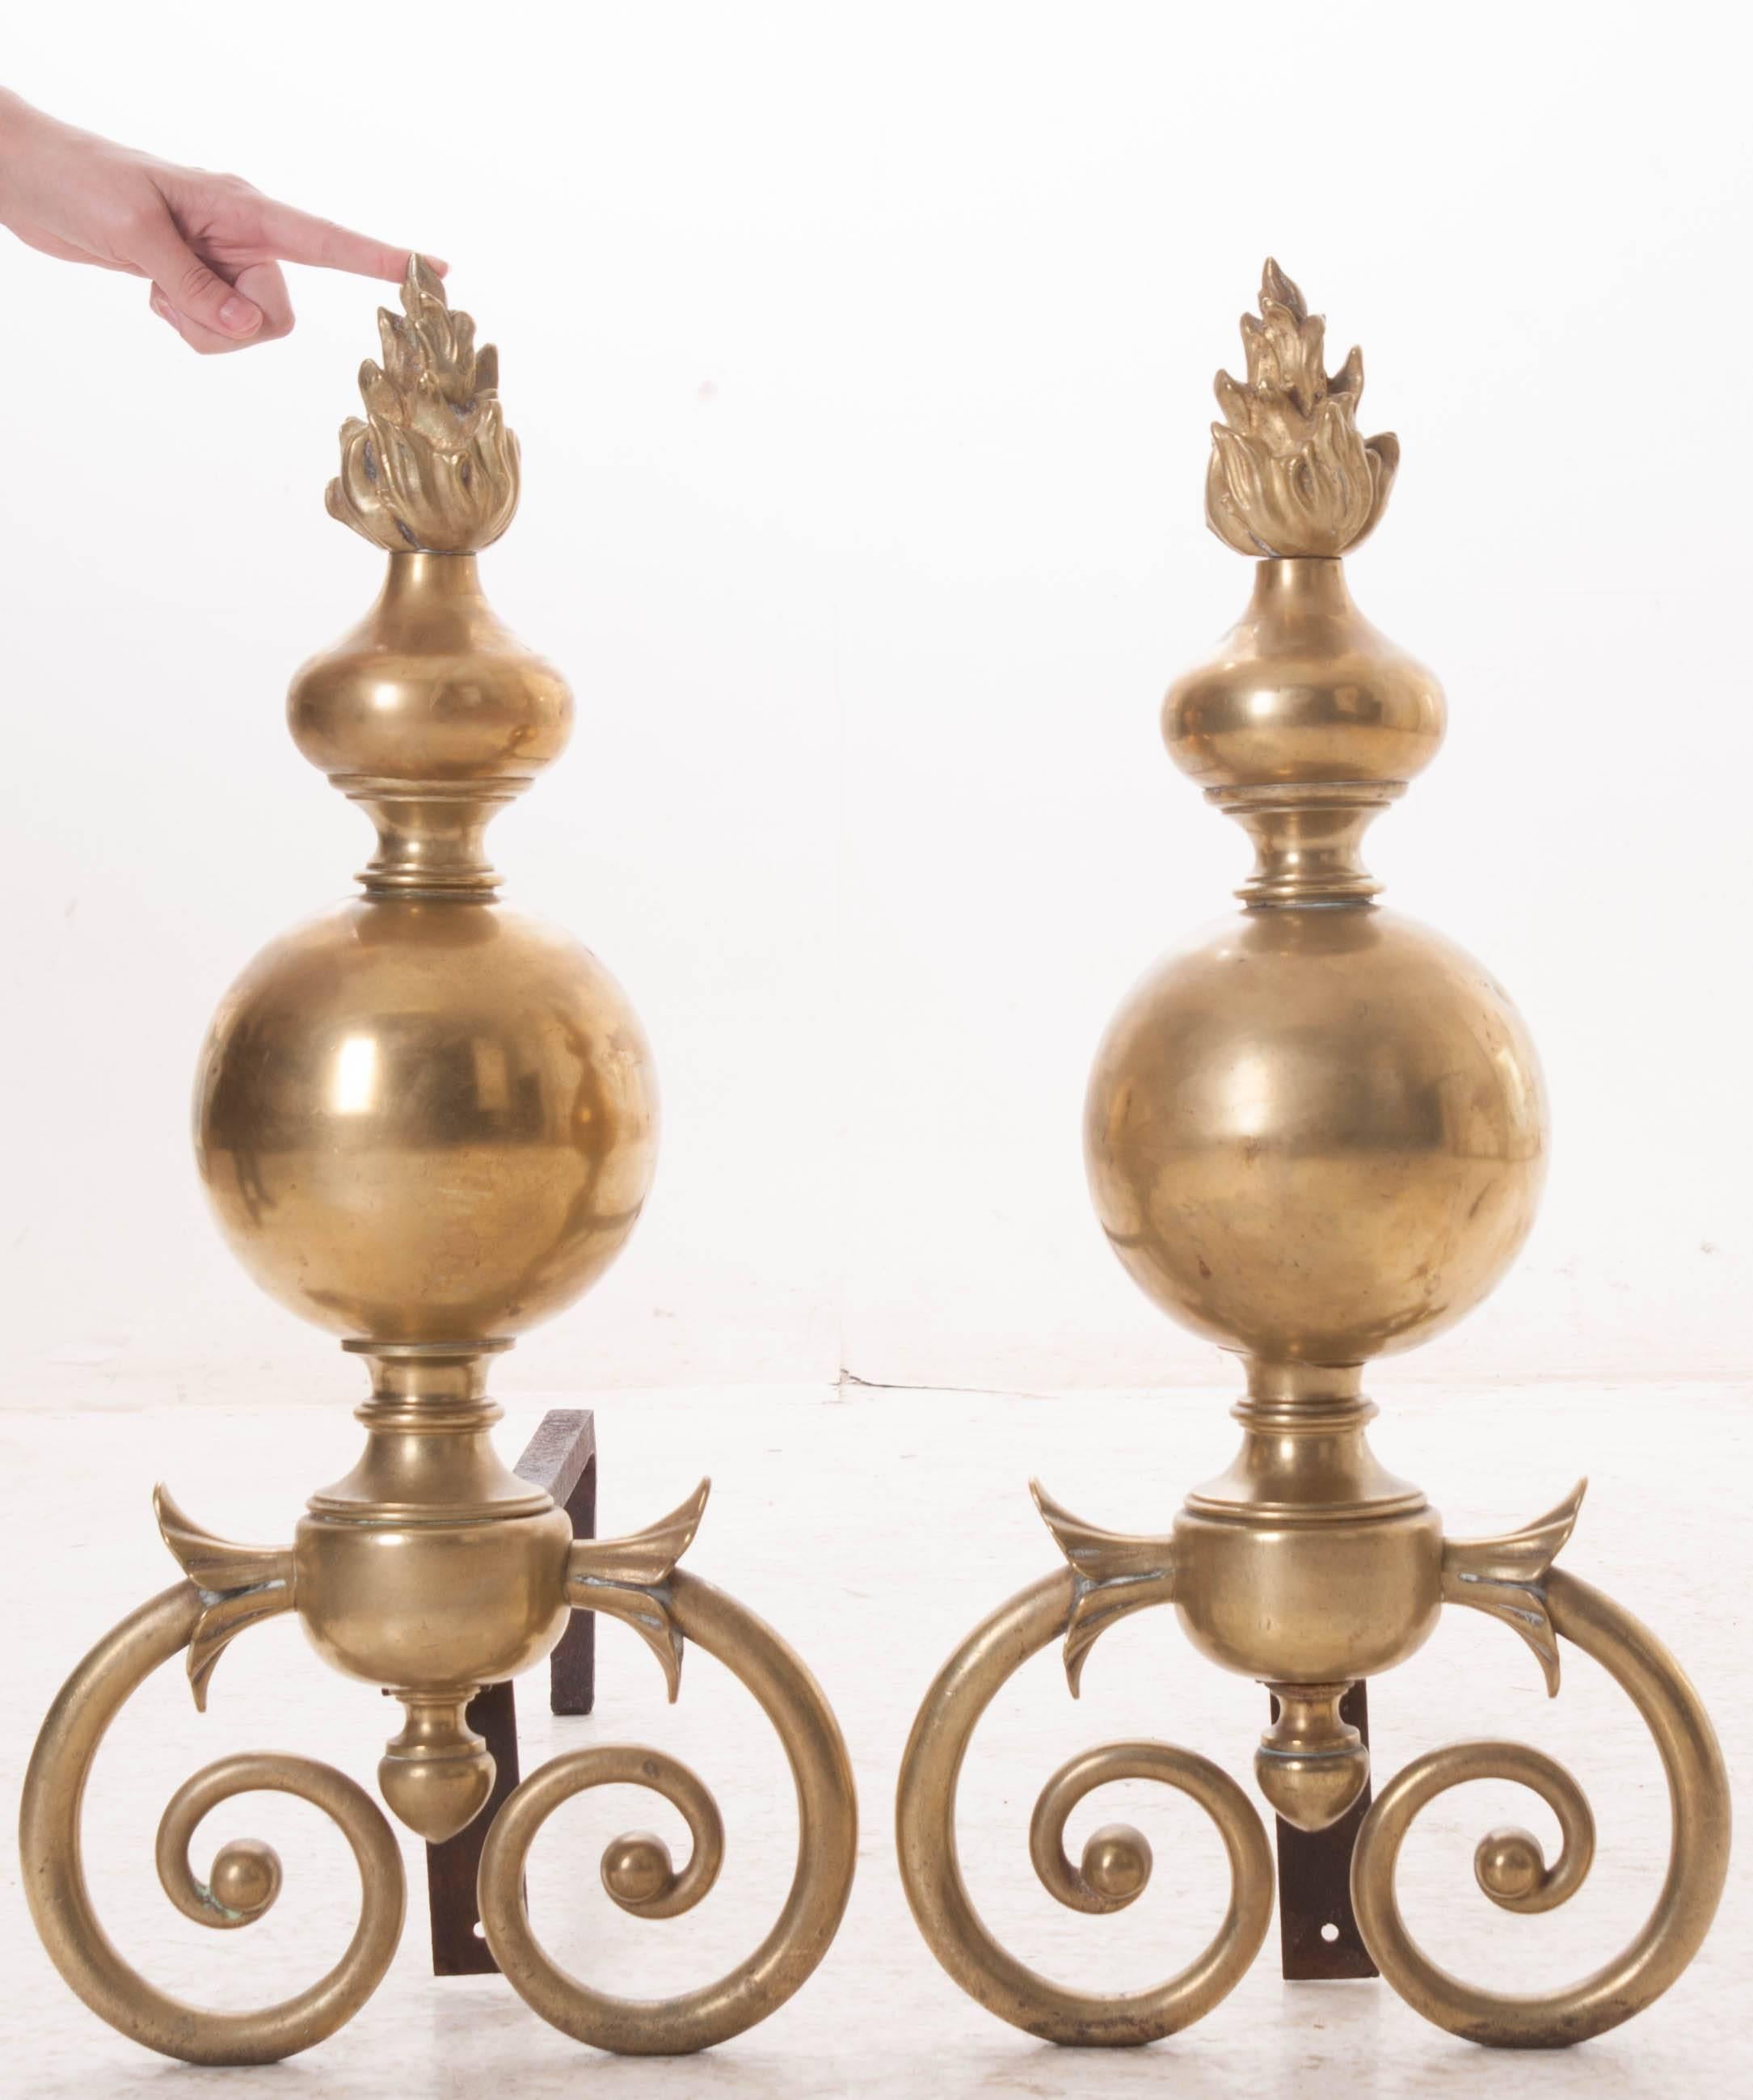 Pair of Large French 18th Century Louis XIV Brass Andirons In Good Condition For Sale In Baton Rouge, LA